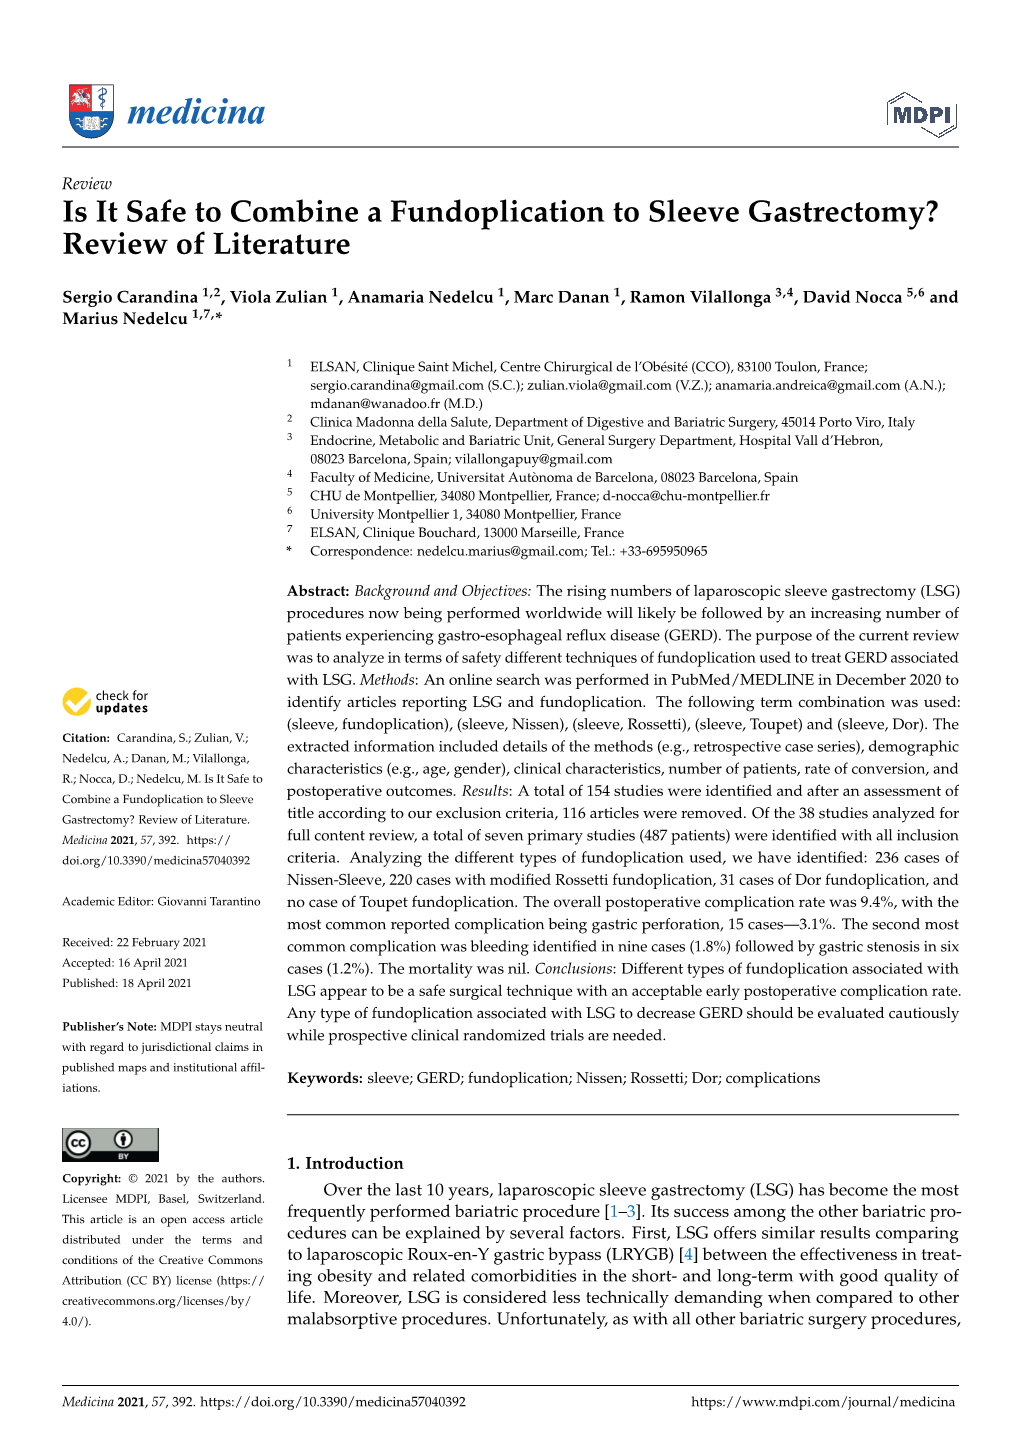 Is It Safe to Combine a Fundoplication to Sleeve Gastrectomy? Review of Literature